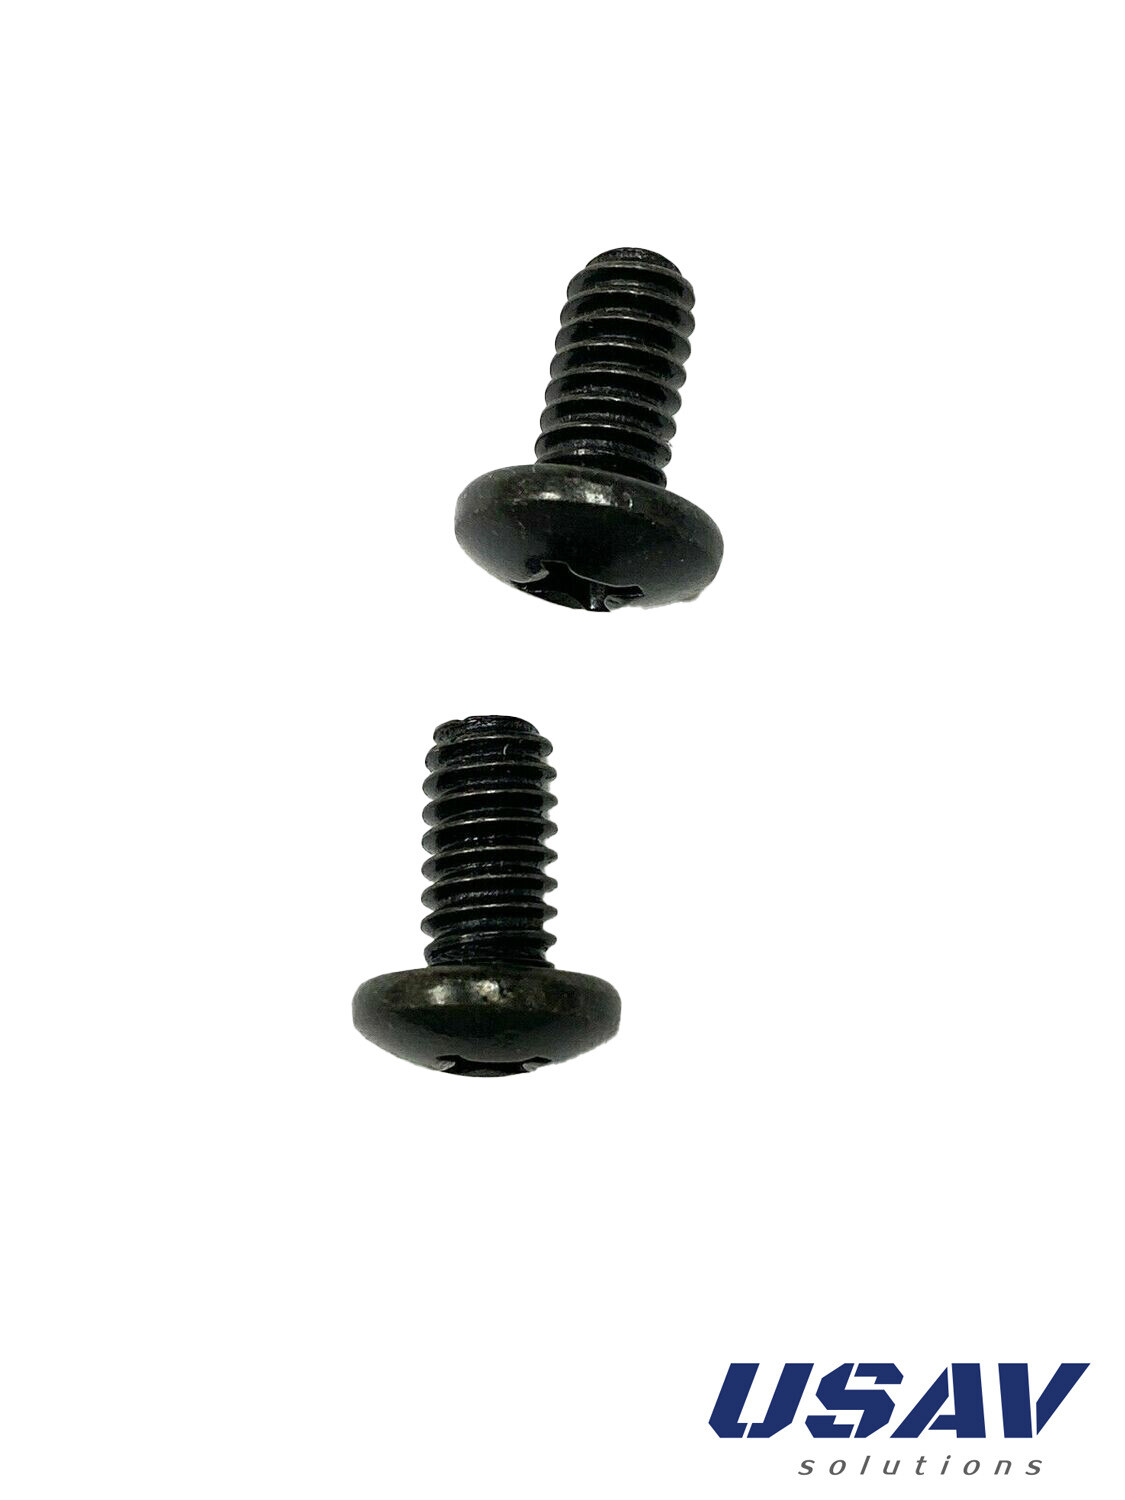 04 Mounting Screws for Bose 151 Wall Mount / fits Bose 151 161 101